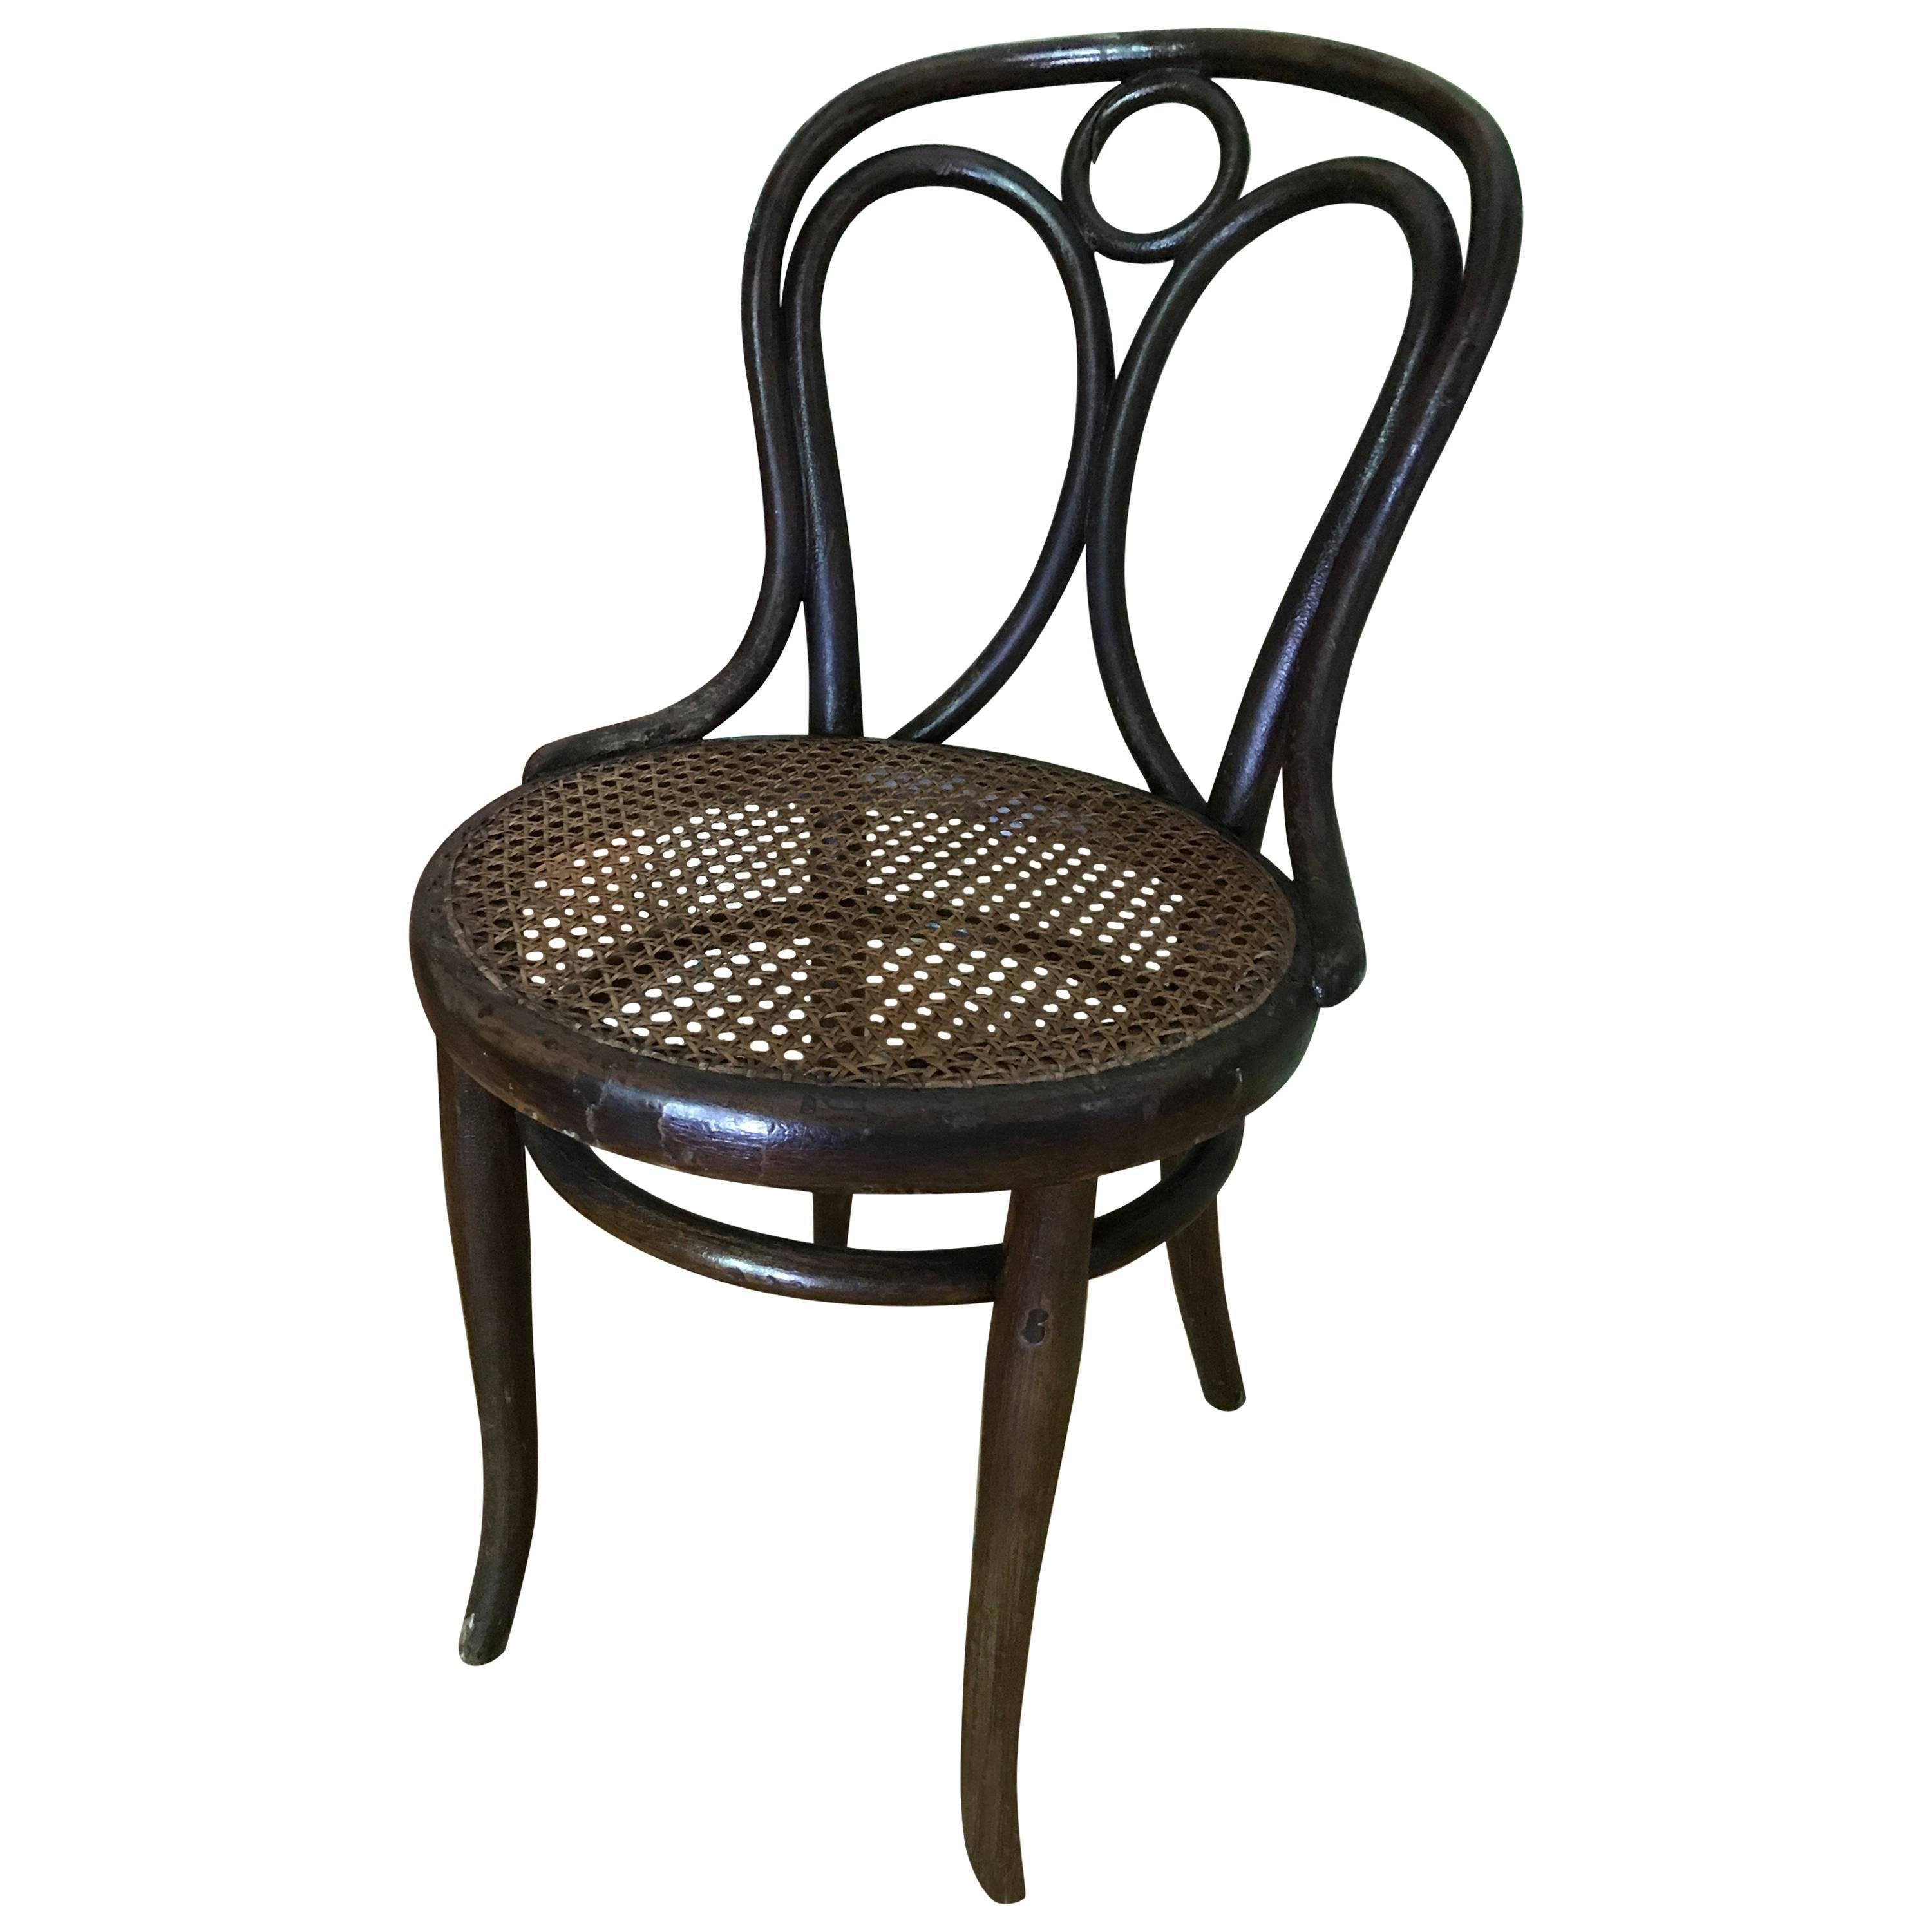 Thonet bentwood  Chair nr 19 Original Patina Stamp by Thonet, 1890